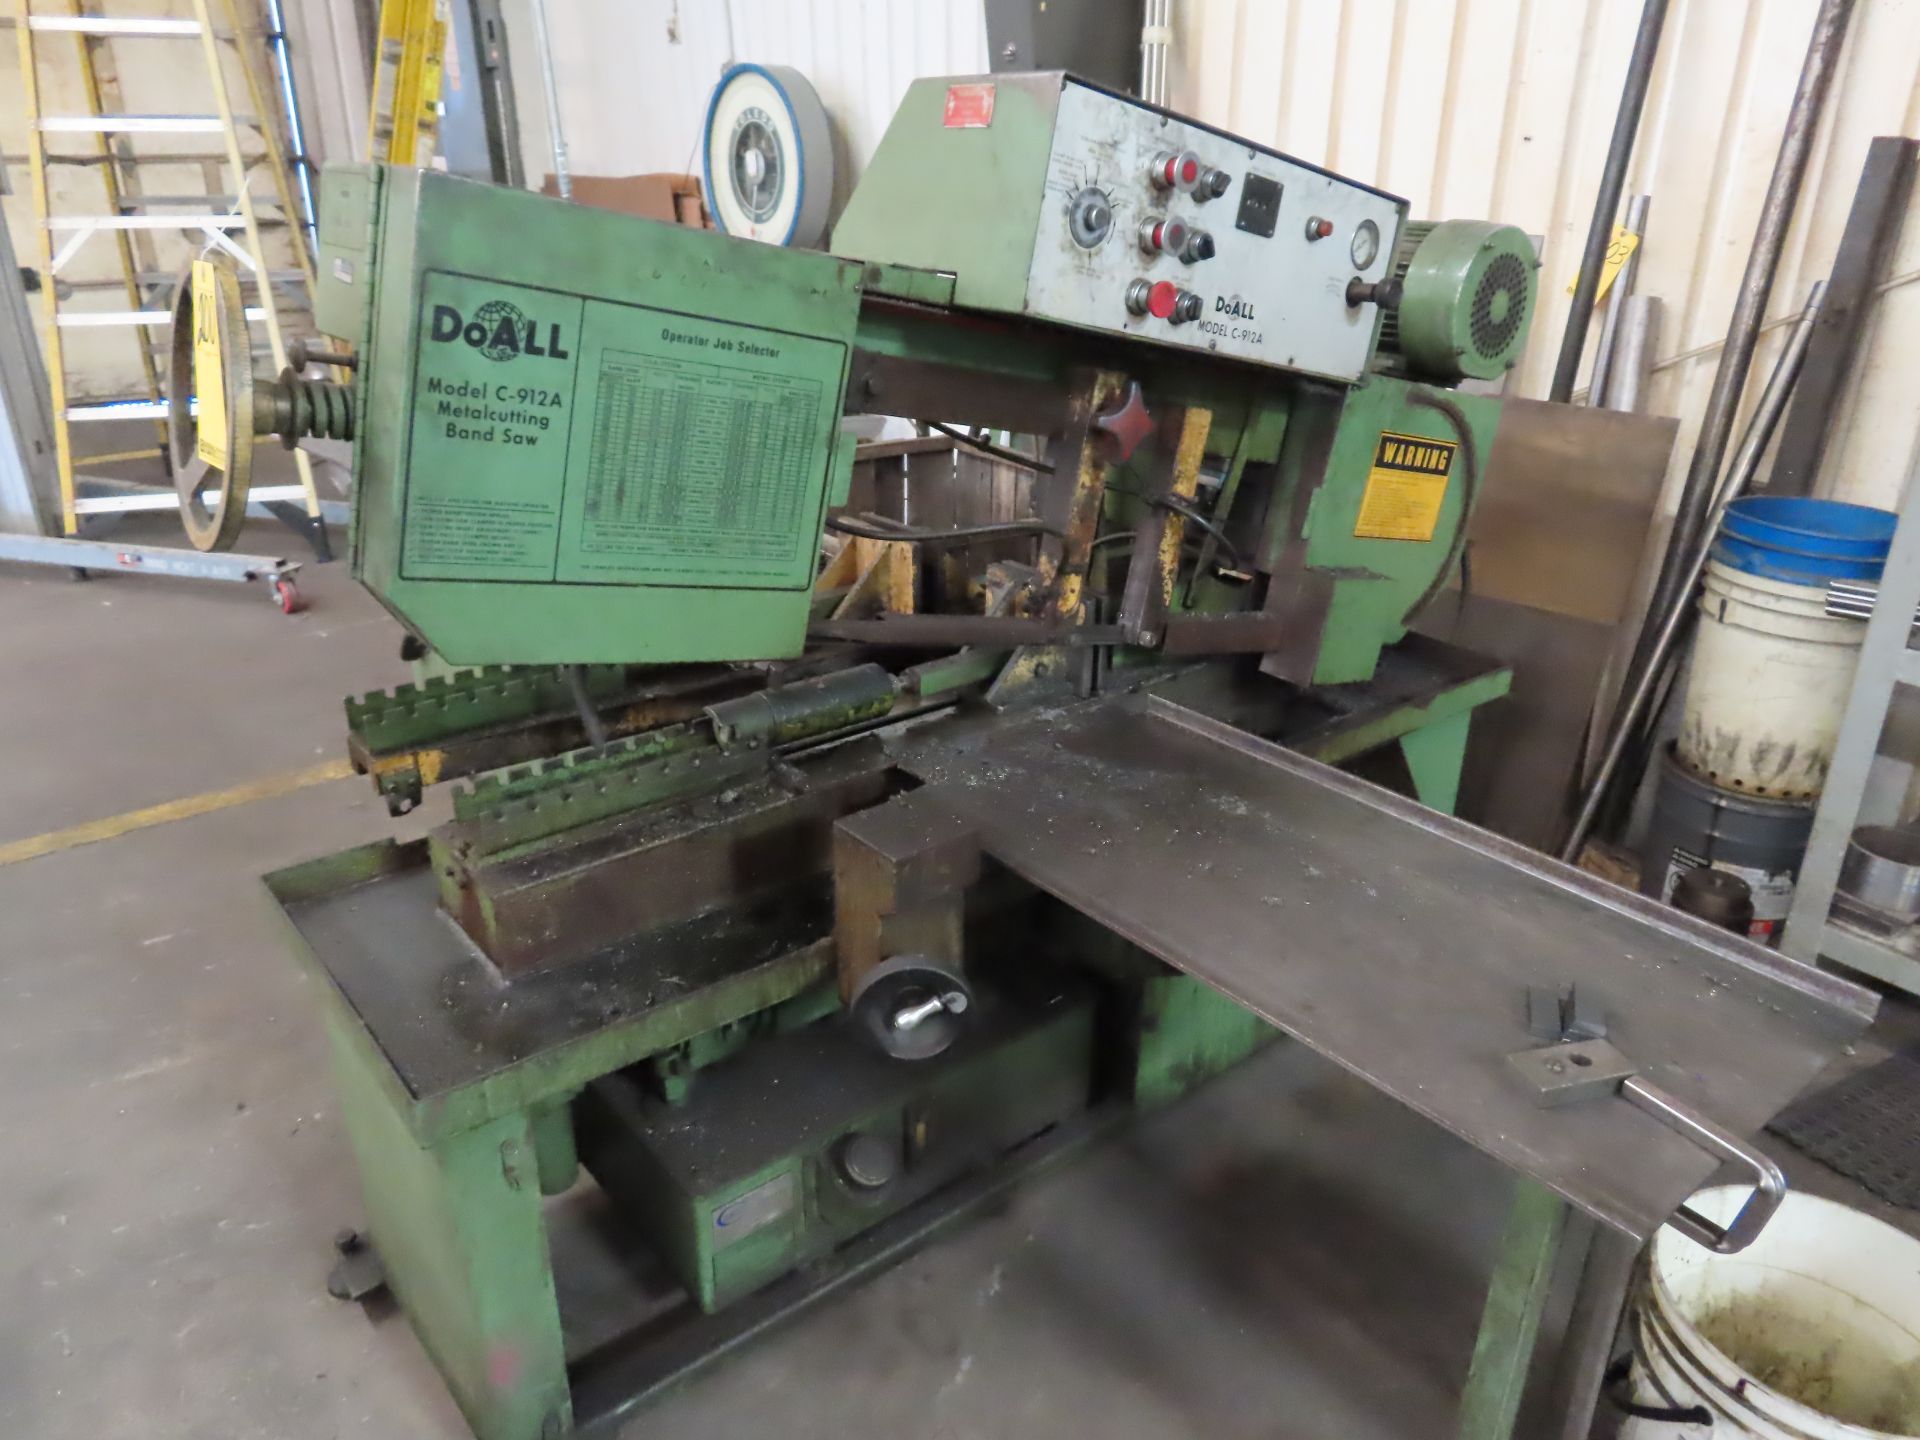 DOALL HORIZ. BANDSAW, M# C-912A, S/N 368-82550, 9" X 12" CAP., POWER CLAMP & FEED W/10' INFEED ROLLE